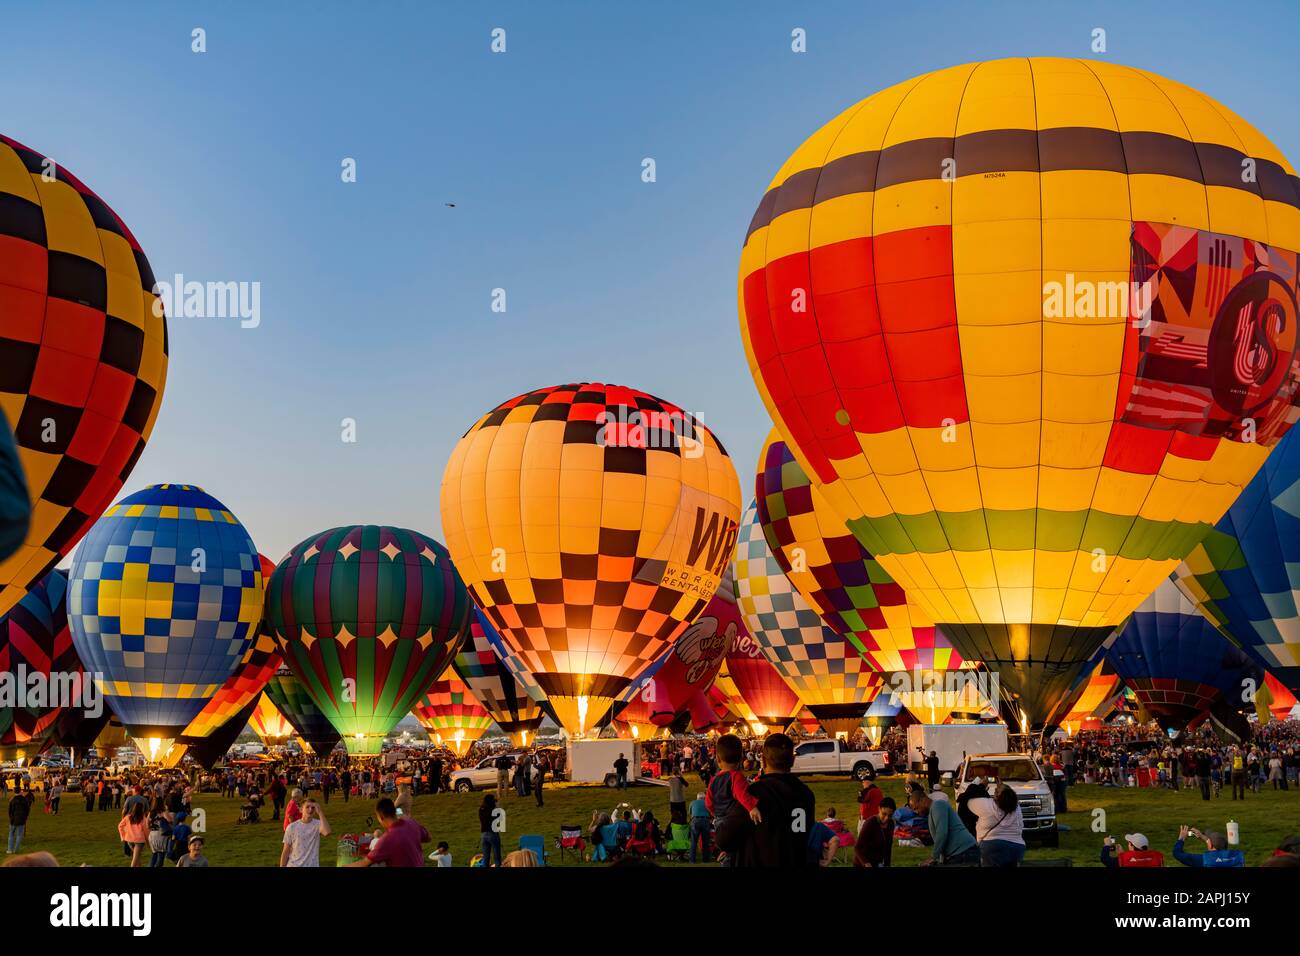 Plons valuta campus Albquerque, OCT 5: Sunset view of the famous Albuquerque International Balloon  Fiesta event on OCT 5, 2019 at Albquerque, New Mexico Stock Photo - Alamy